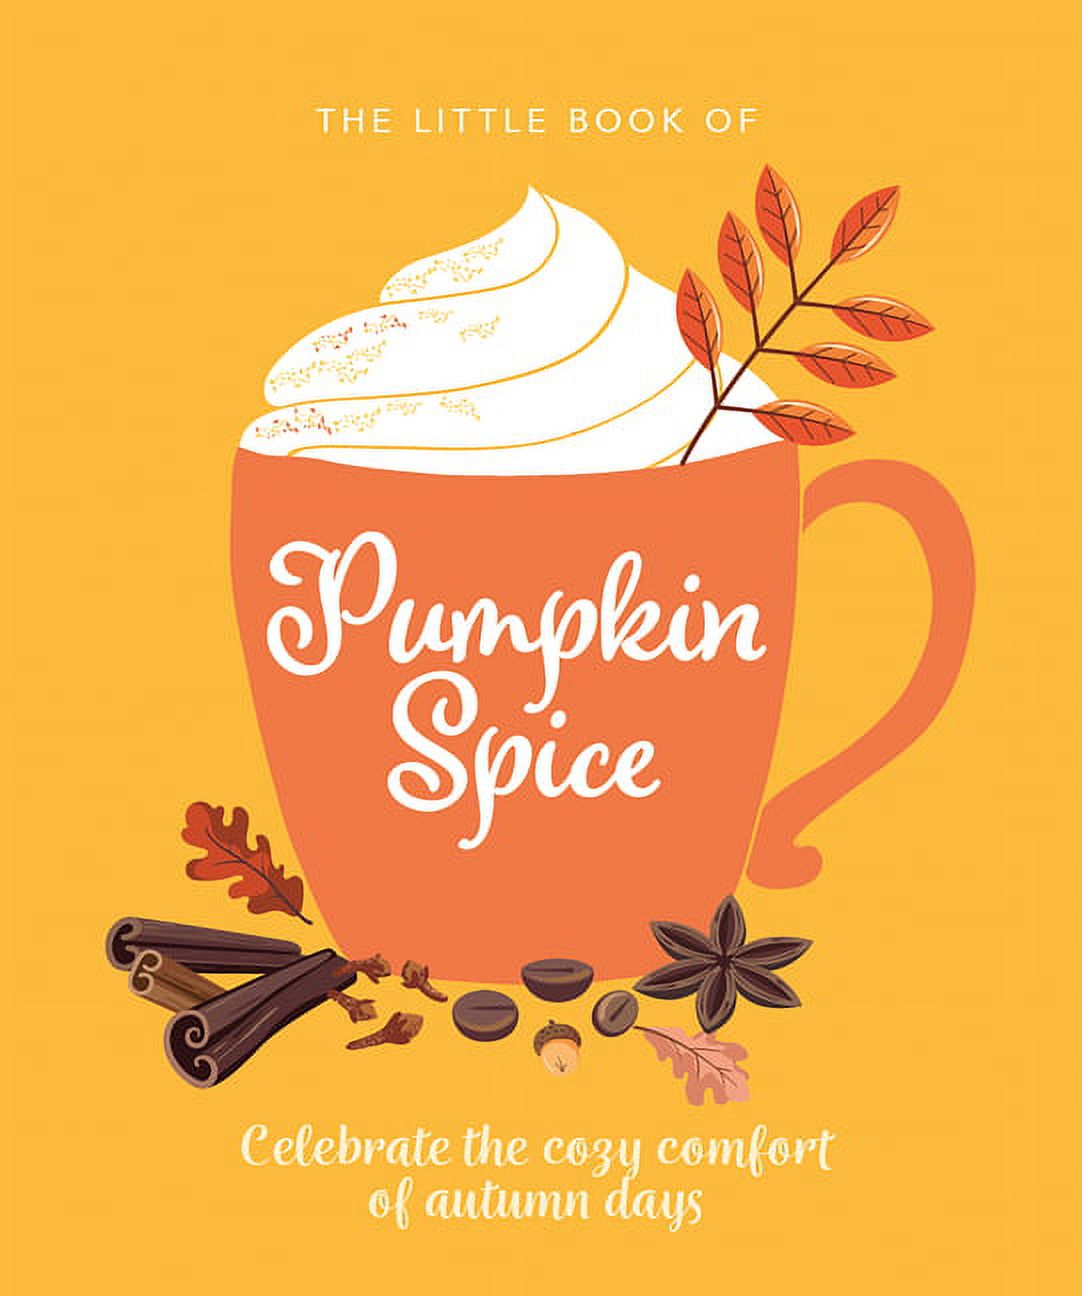 Little Books of Food & Drink: The Little Book of Pumpkin Spice (Hardcover) - image 1 of 1